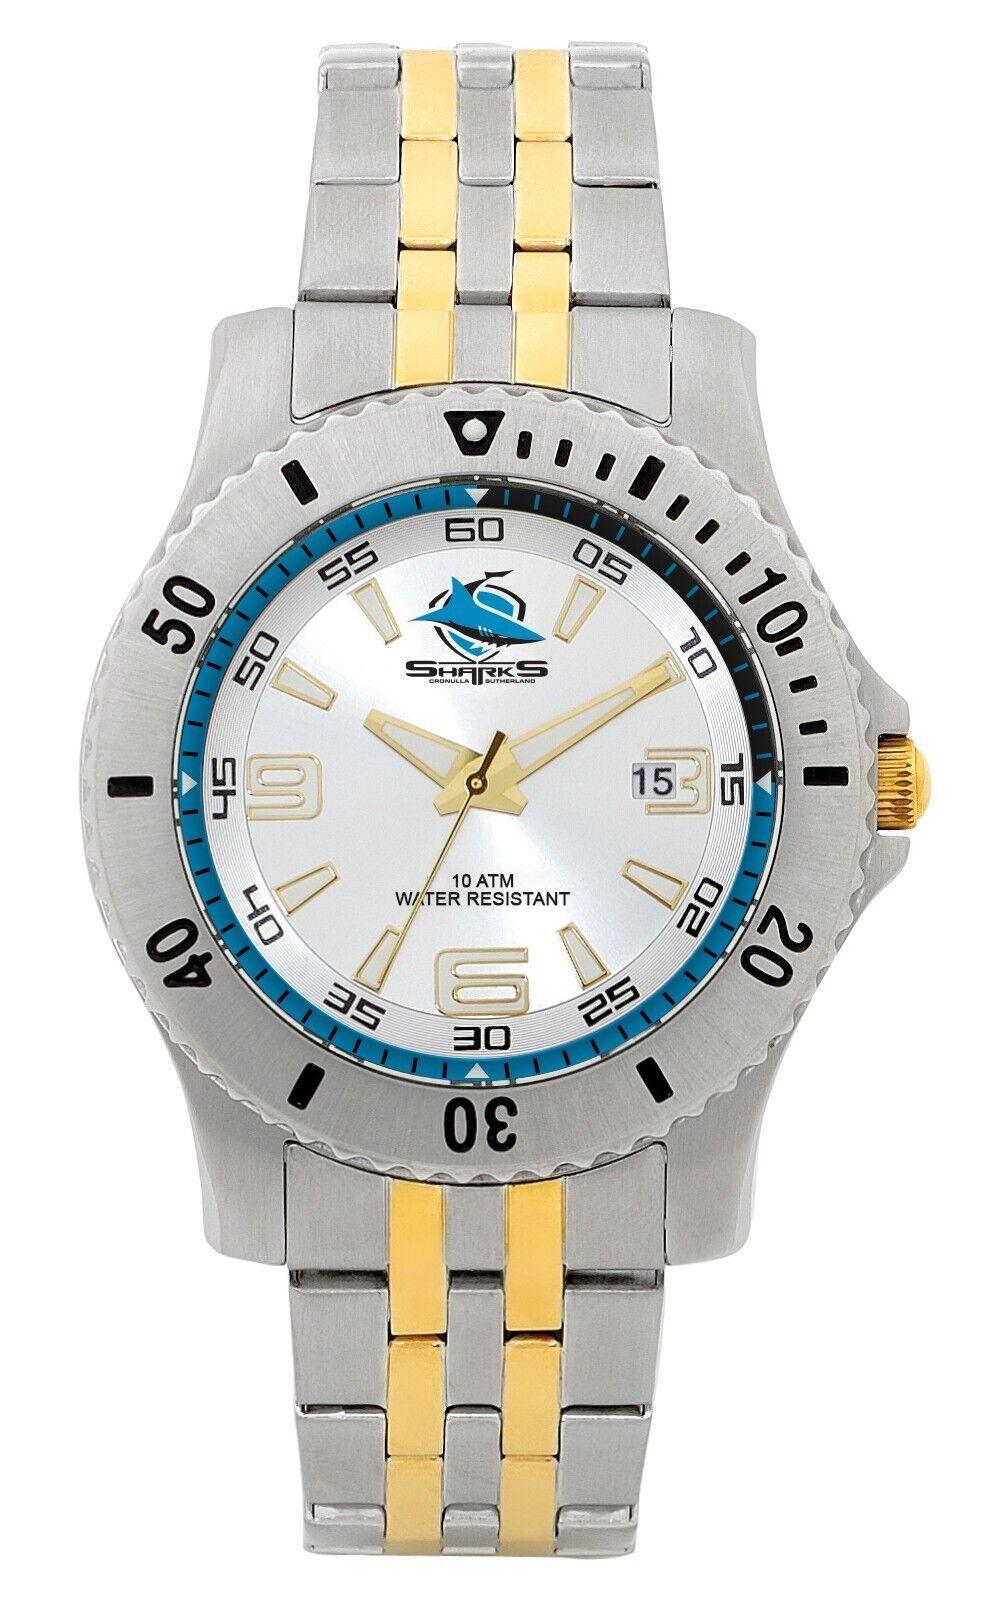 NRL Legends Watch - Cronulla Sharks - Stainless Steel Band - Box incl.